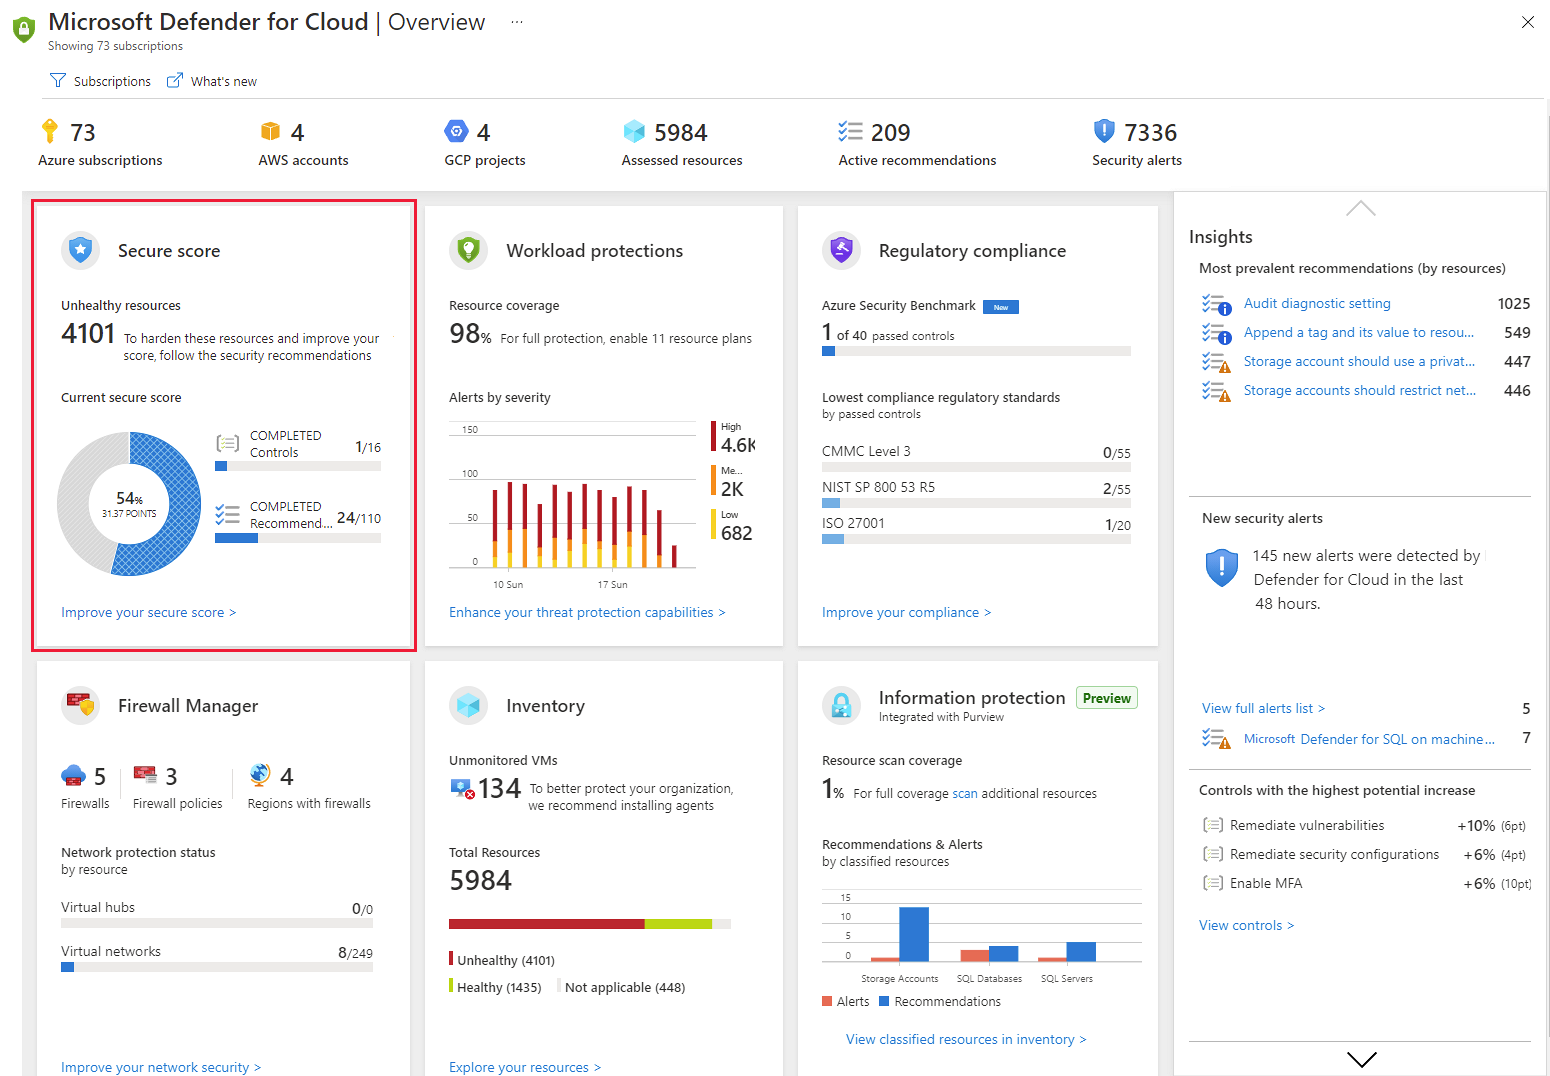 The secure score on Defender for Cloud's dashboard